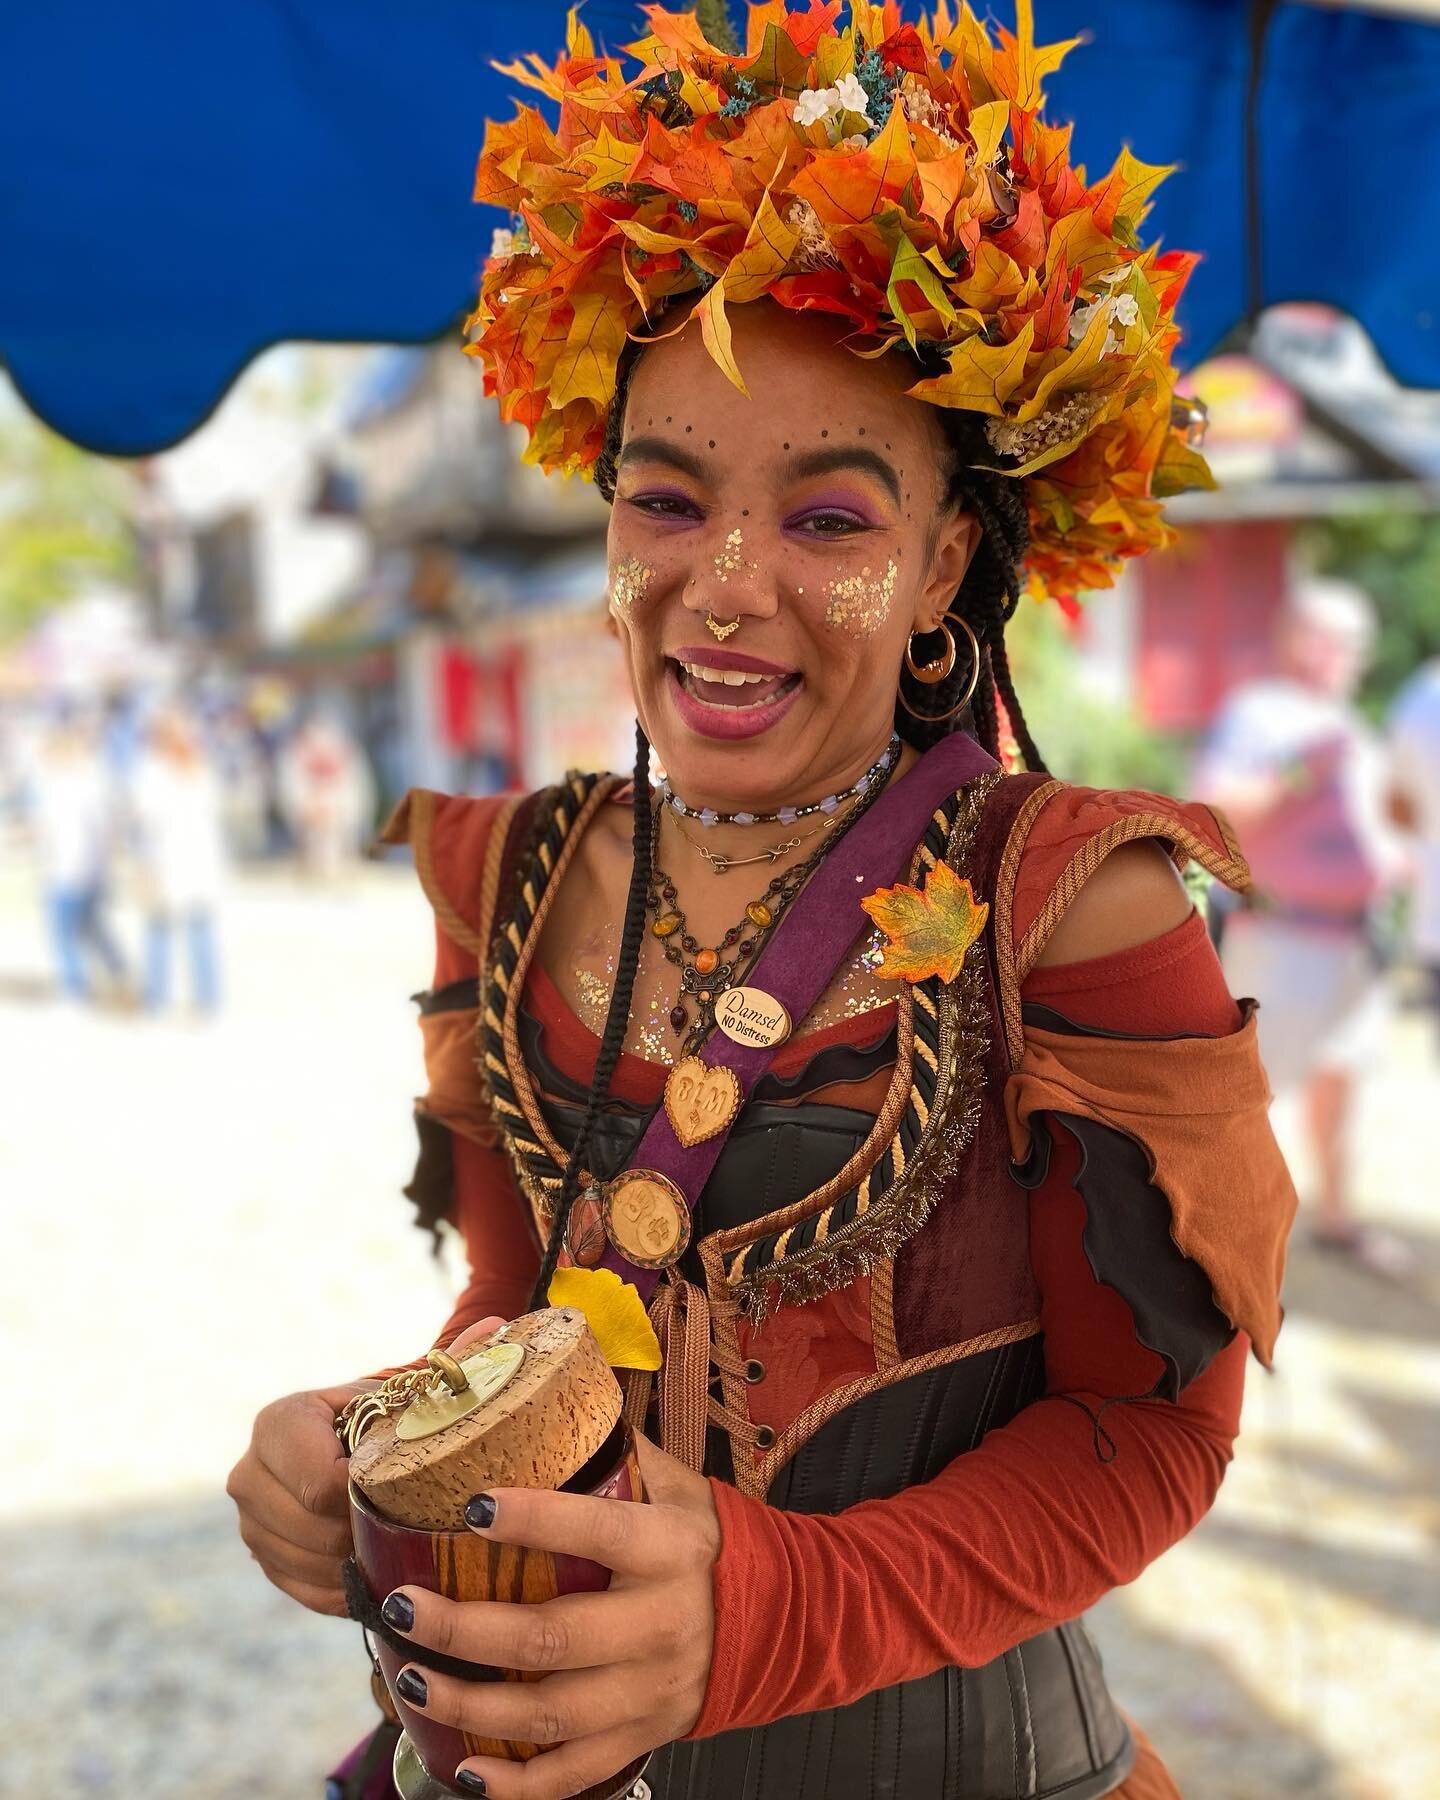 Nothing is as stunning as this stunning soul, but I tried... with her silhouette-- cut freehand with only ✂️, at the Maryland Renaissance Festival (@mdrenfest / @mdrennfest ) 
.
.
.
.
#mdrennfest #mdrenfest #mdrenaissancefestival #mdrenfaire #mdrennf